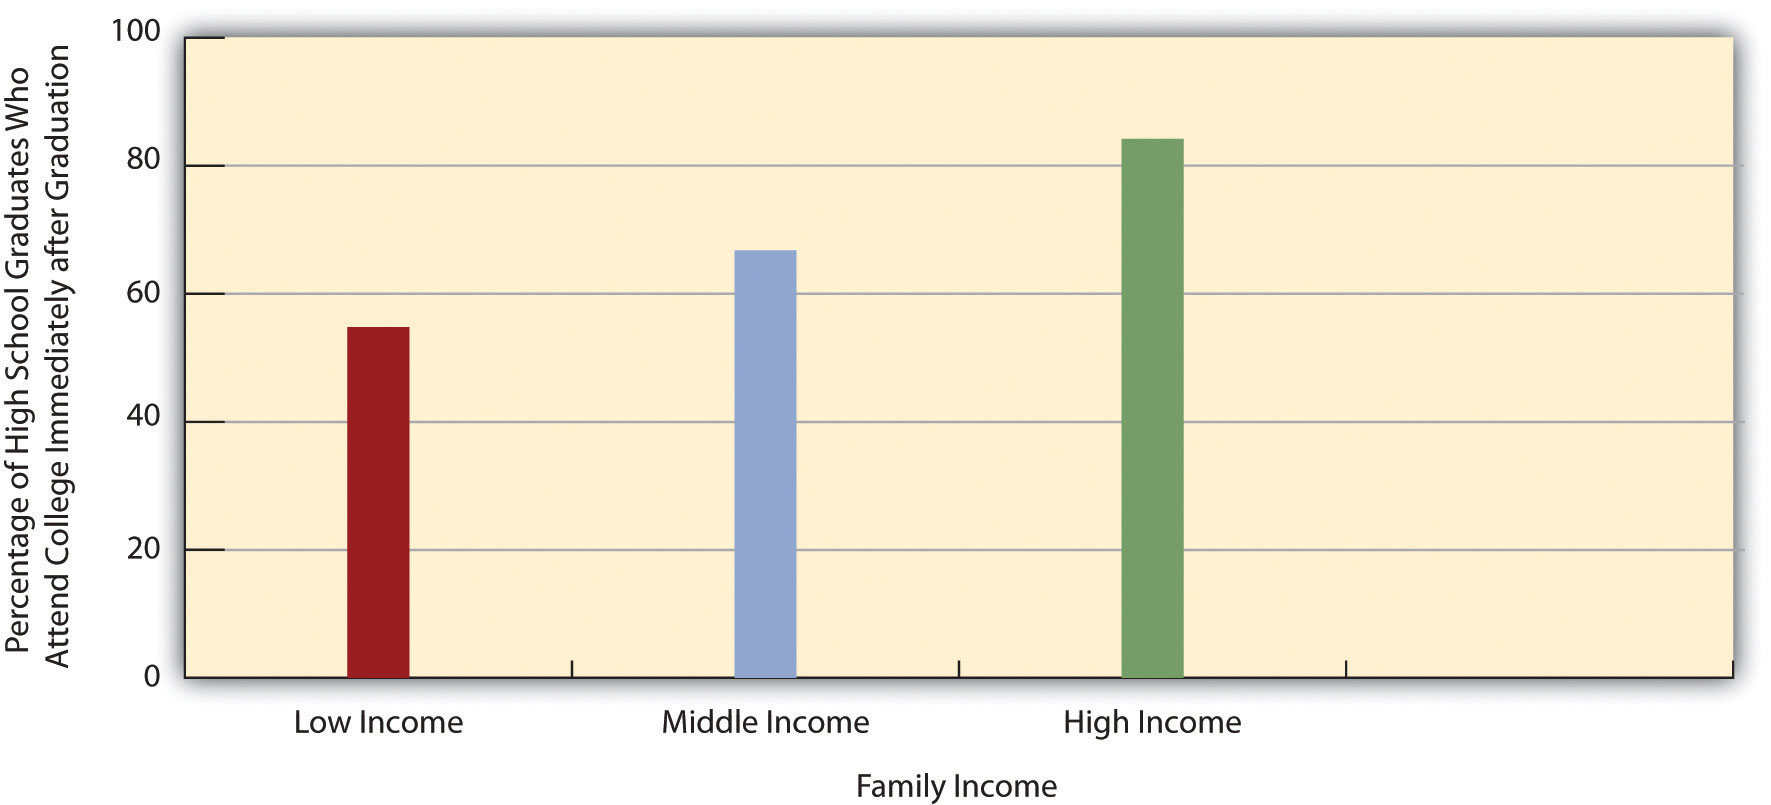 Family Income and Percentage of High School Graduates Who Attend College Immediately after Graduation. Over 80% of people from high income households go to college immediately after, around 65% of middle income people do, and around 57% of low income people do